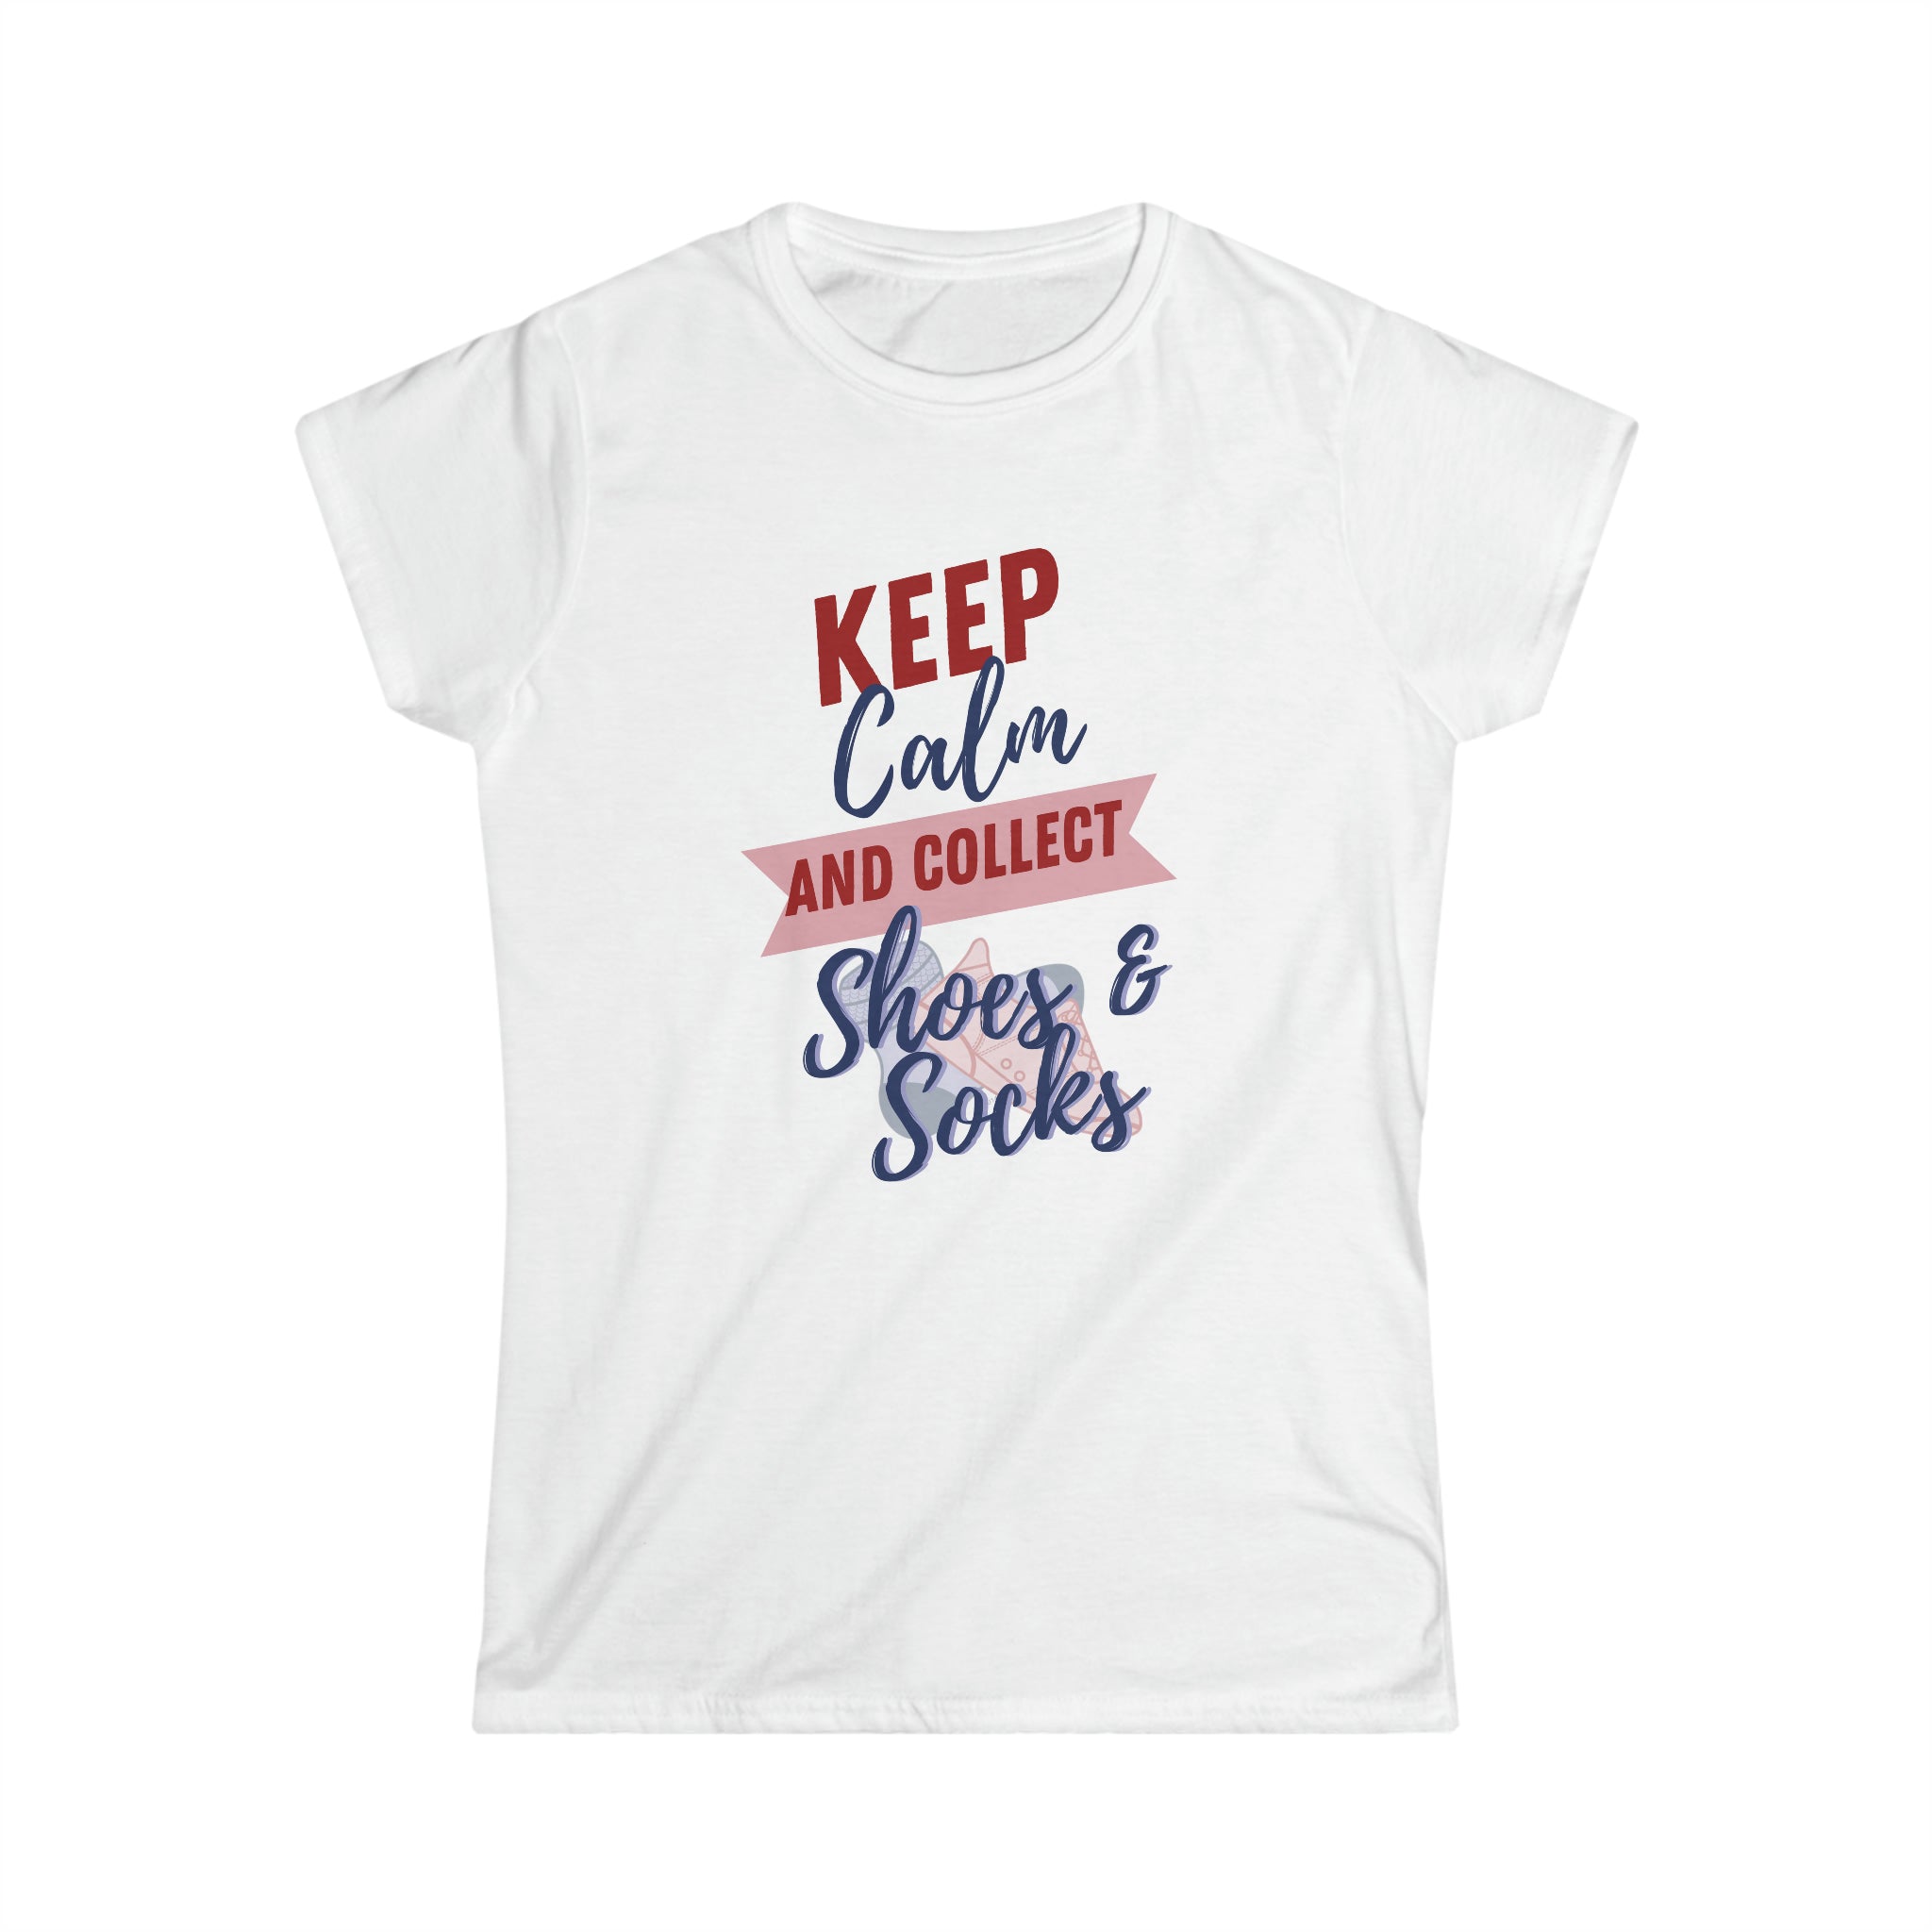 Shoes & Socks Women's Softstyle Tee